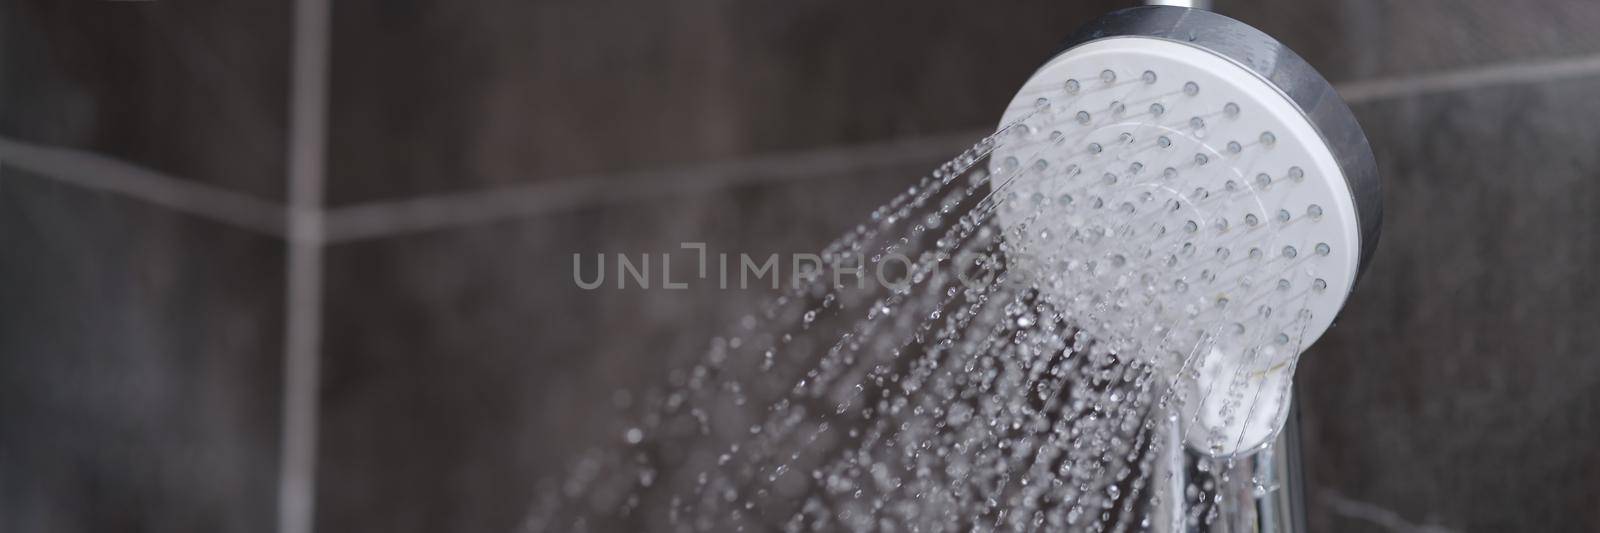 Running water pours from chrome-plated shower mixer closeup by kuprevich